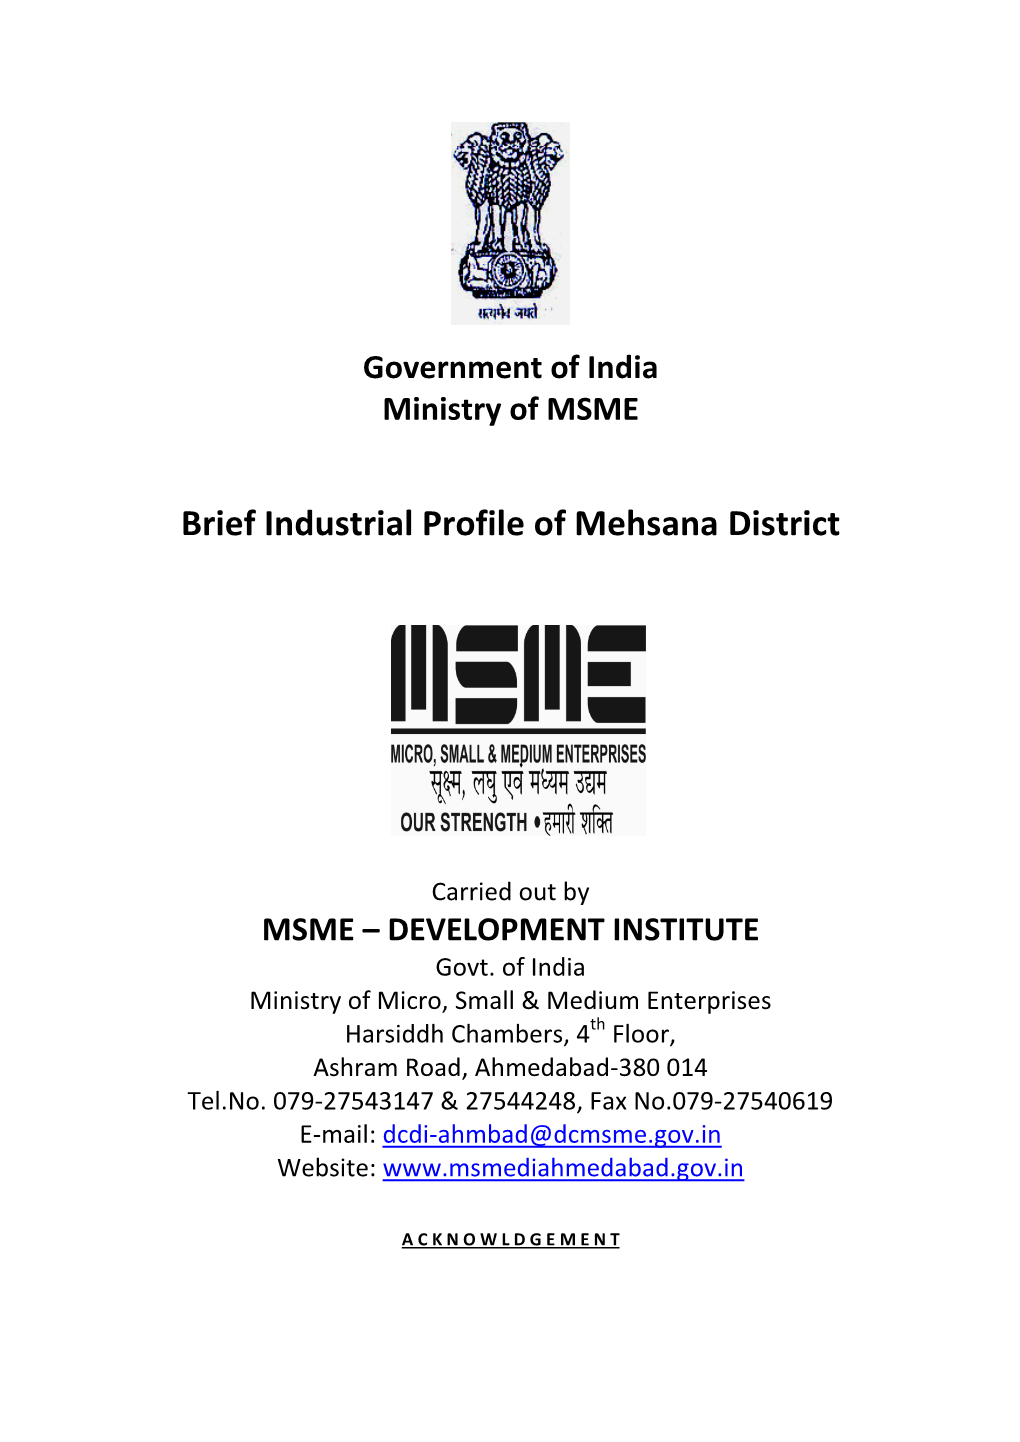 Brief Industrial Profile of Mehsana District